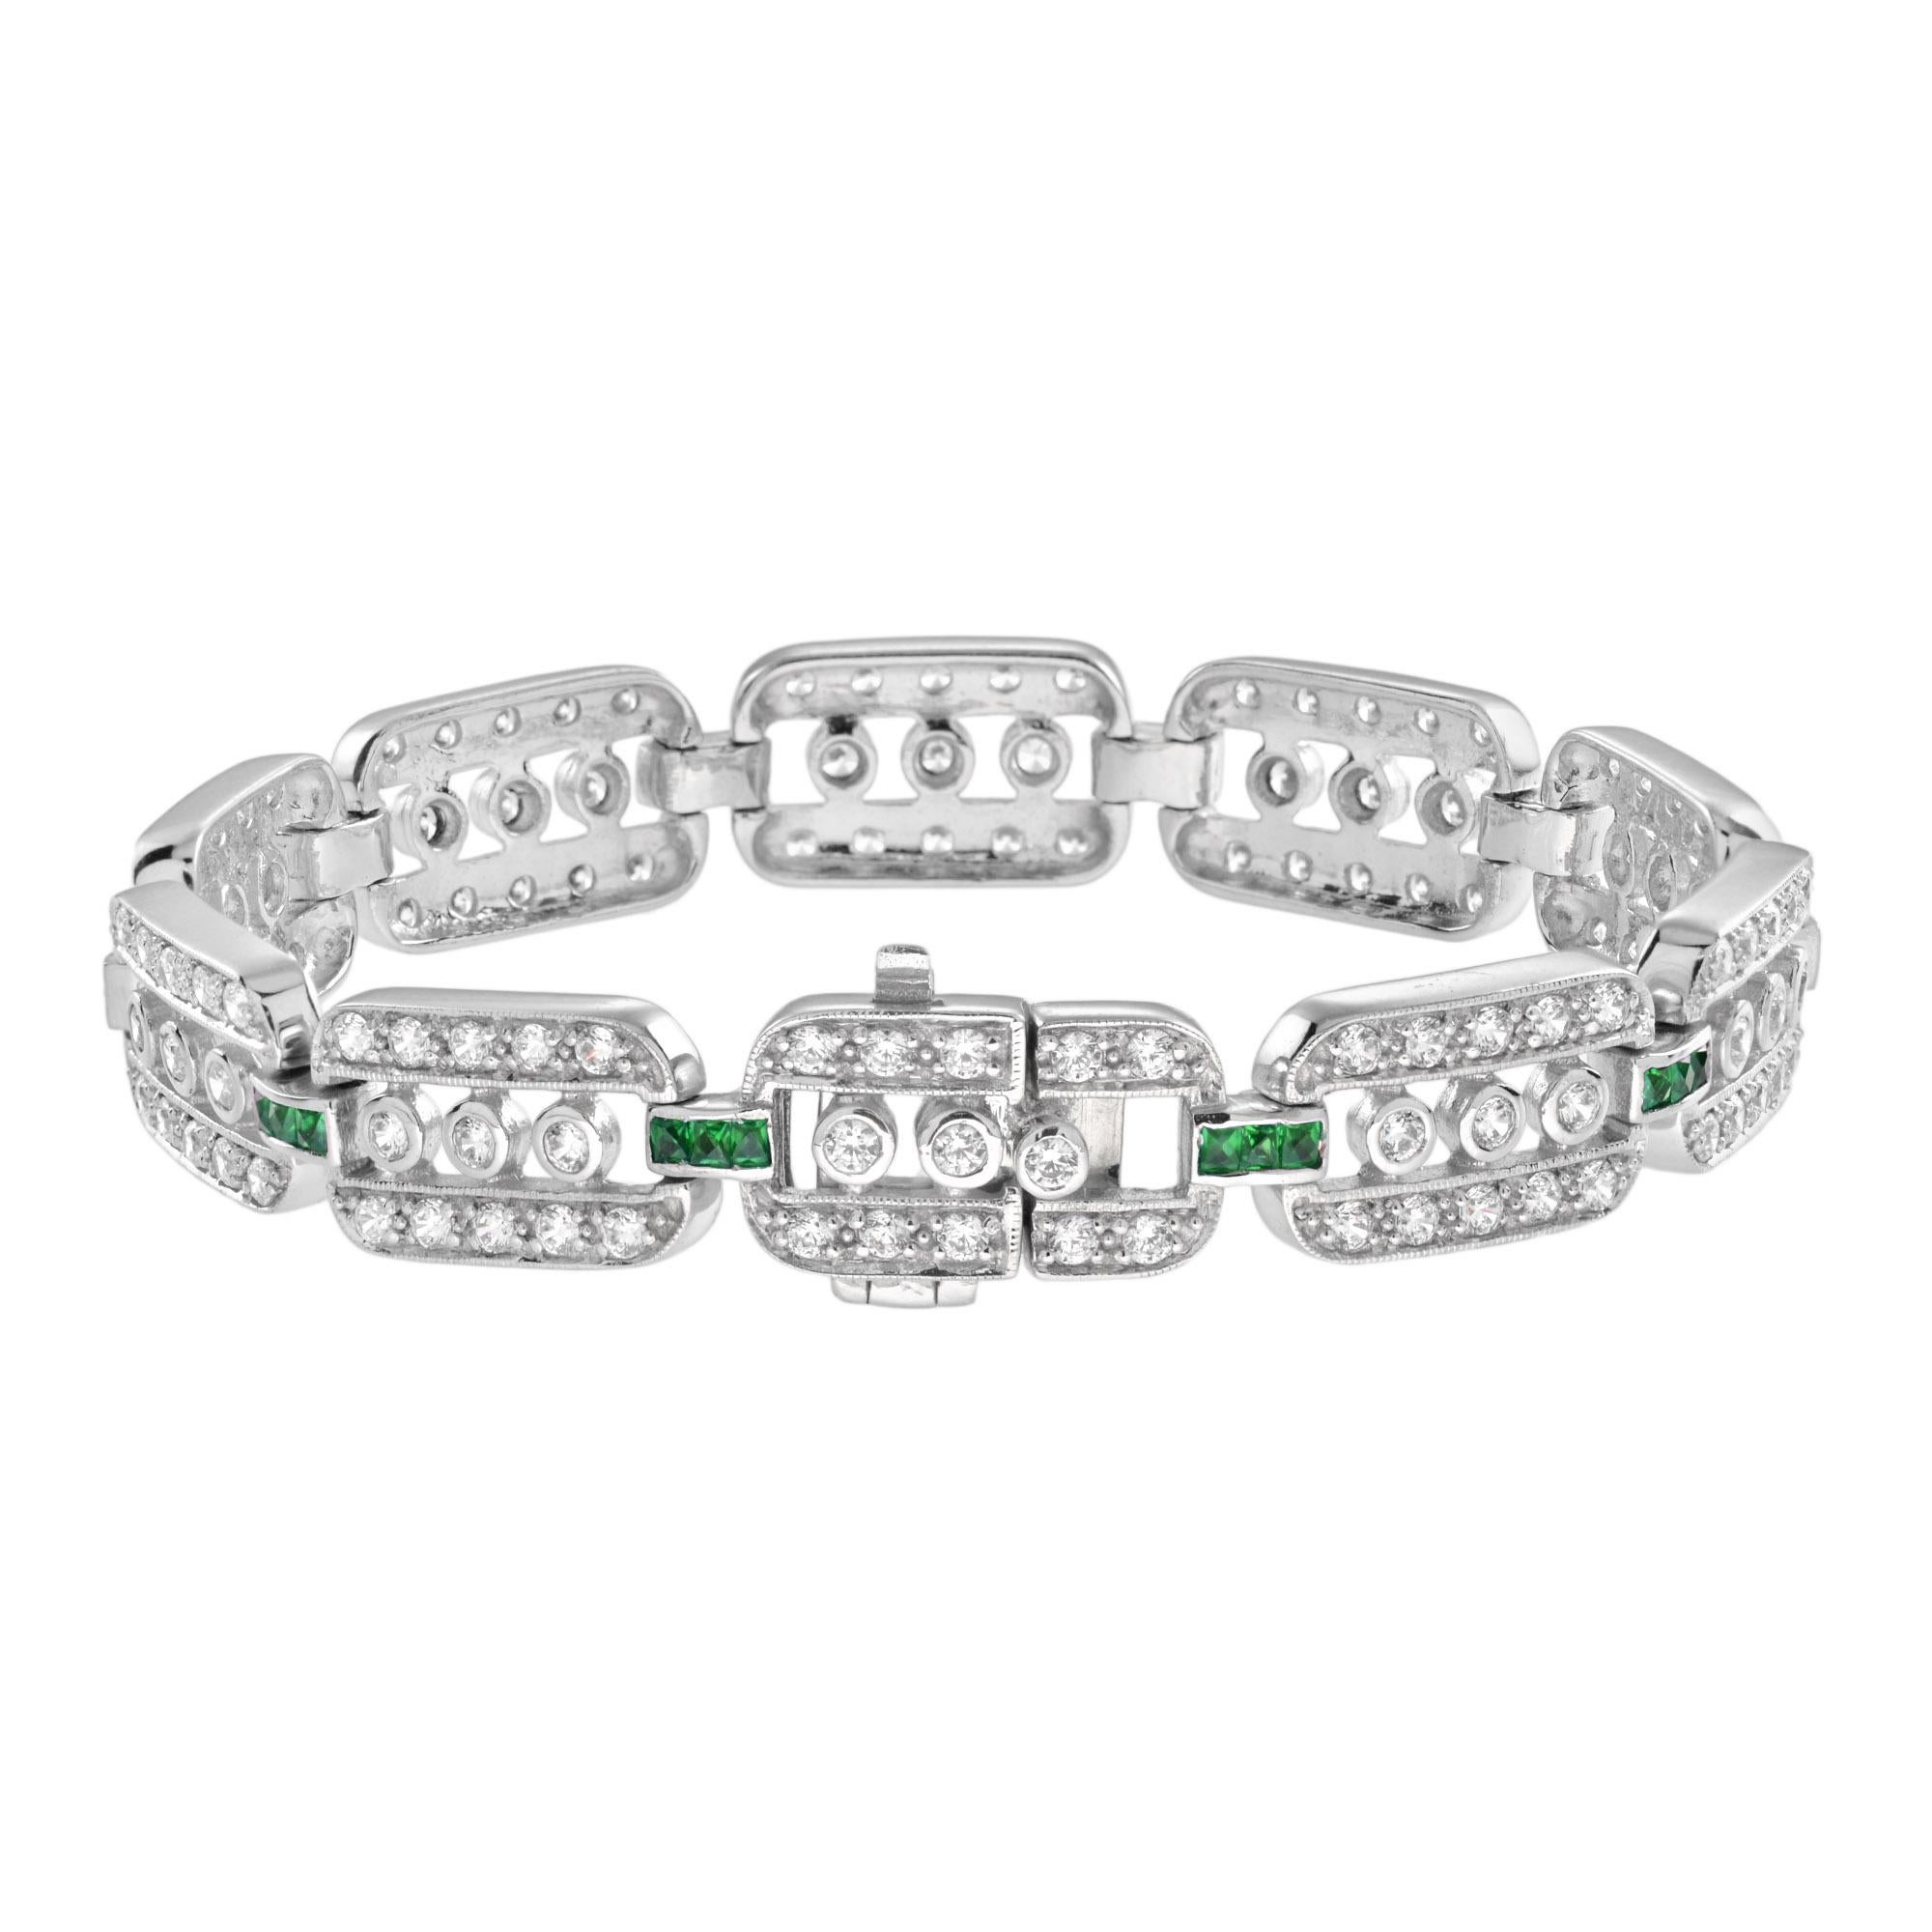 Round Cut 6 Ct. Diamond and Emerald Art Deco Style Link Bracelet in 14K White Gold For Sale